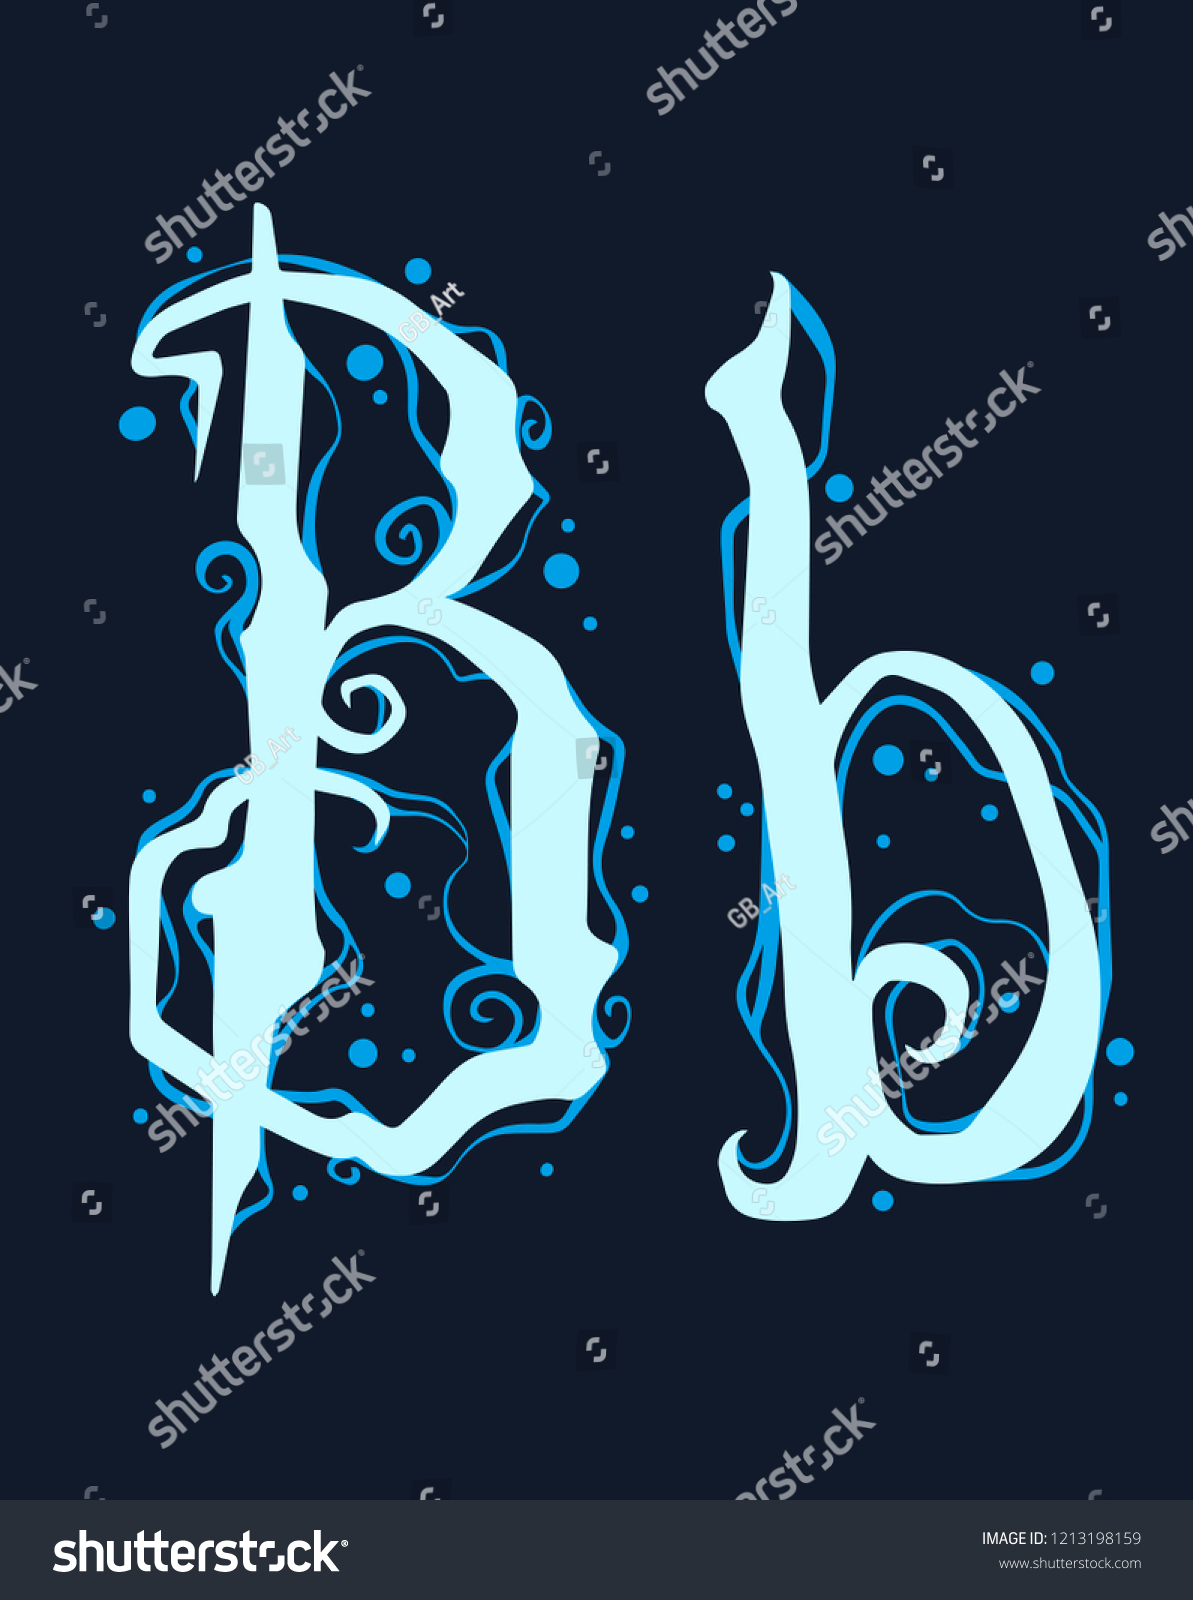 Handrawn Design Font Blue Gothic Curly Stock Vector Royalty Free 1213198159